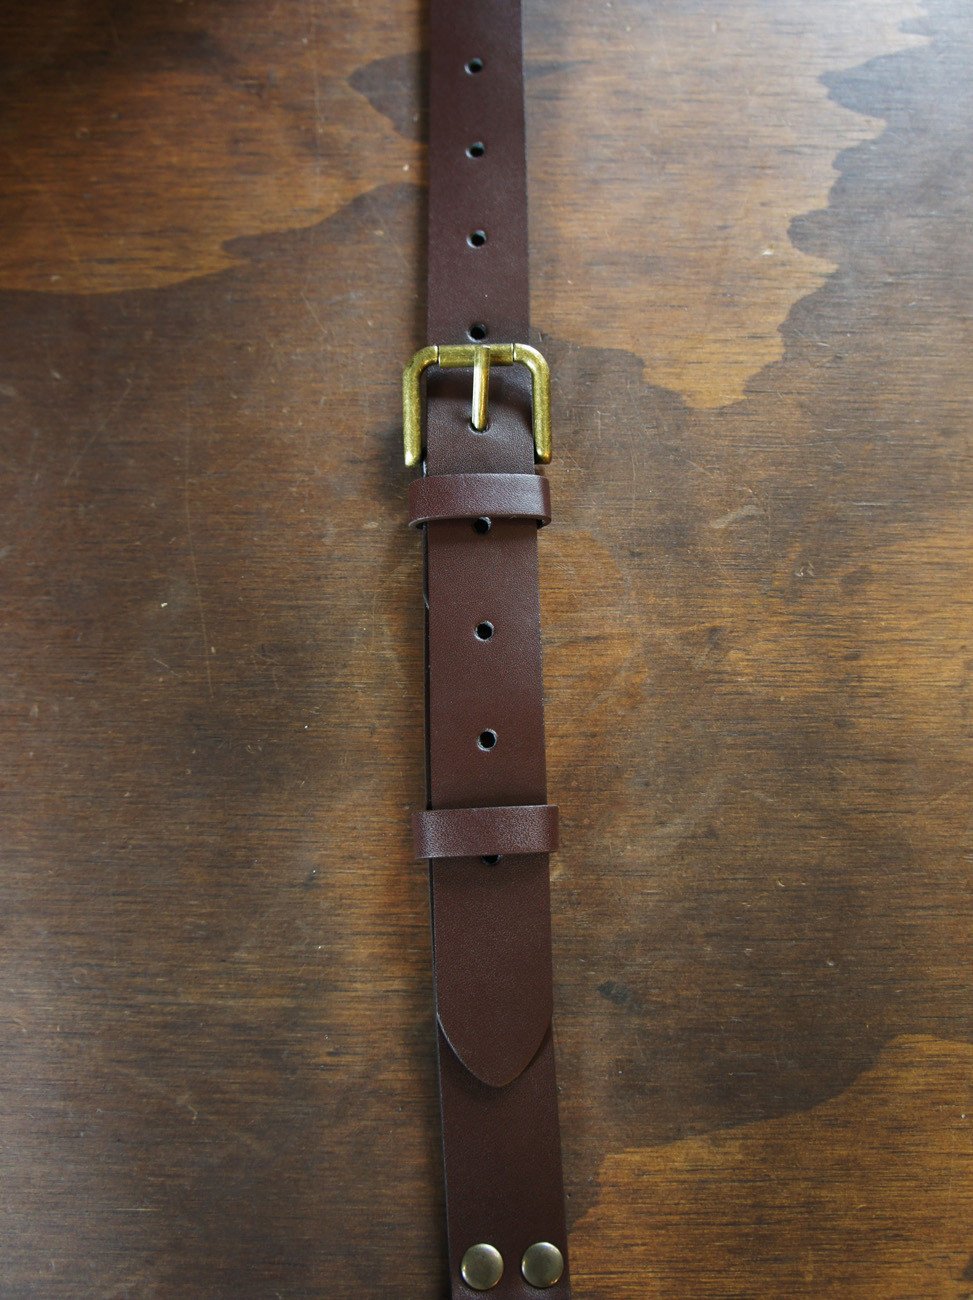 Leather Bucklestrap Button-On Suspenders - 1 Inch Wide 